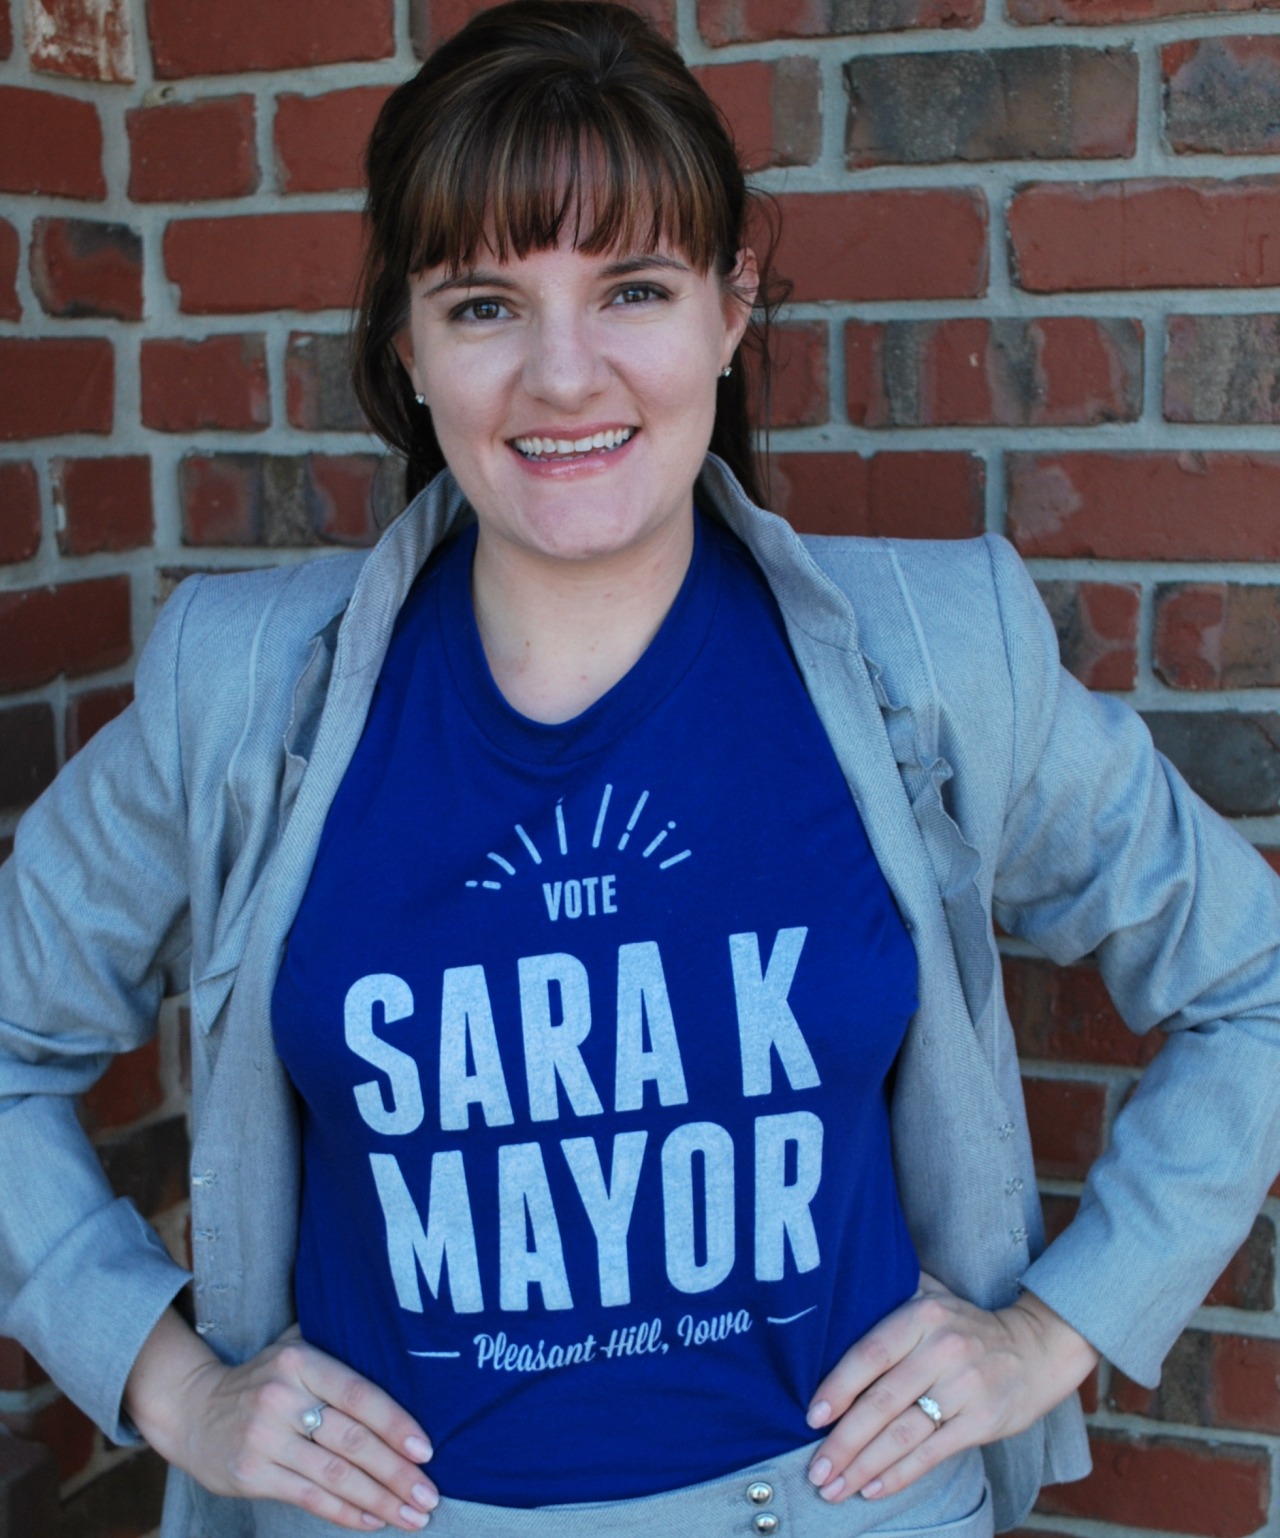 Congratulations to Sara for winning the mayoral race, becoming the first female mayor of Pleasant Hill! Sara not only won, but she took home 78% of the vote, like a total badass.
Sara submitted her decision to run for mayor to our “What Would You Do...